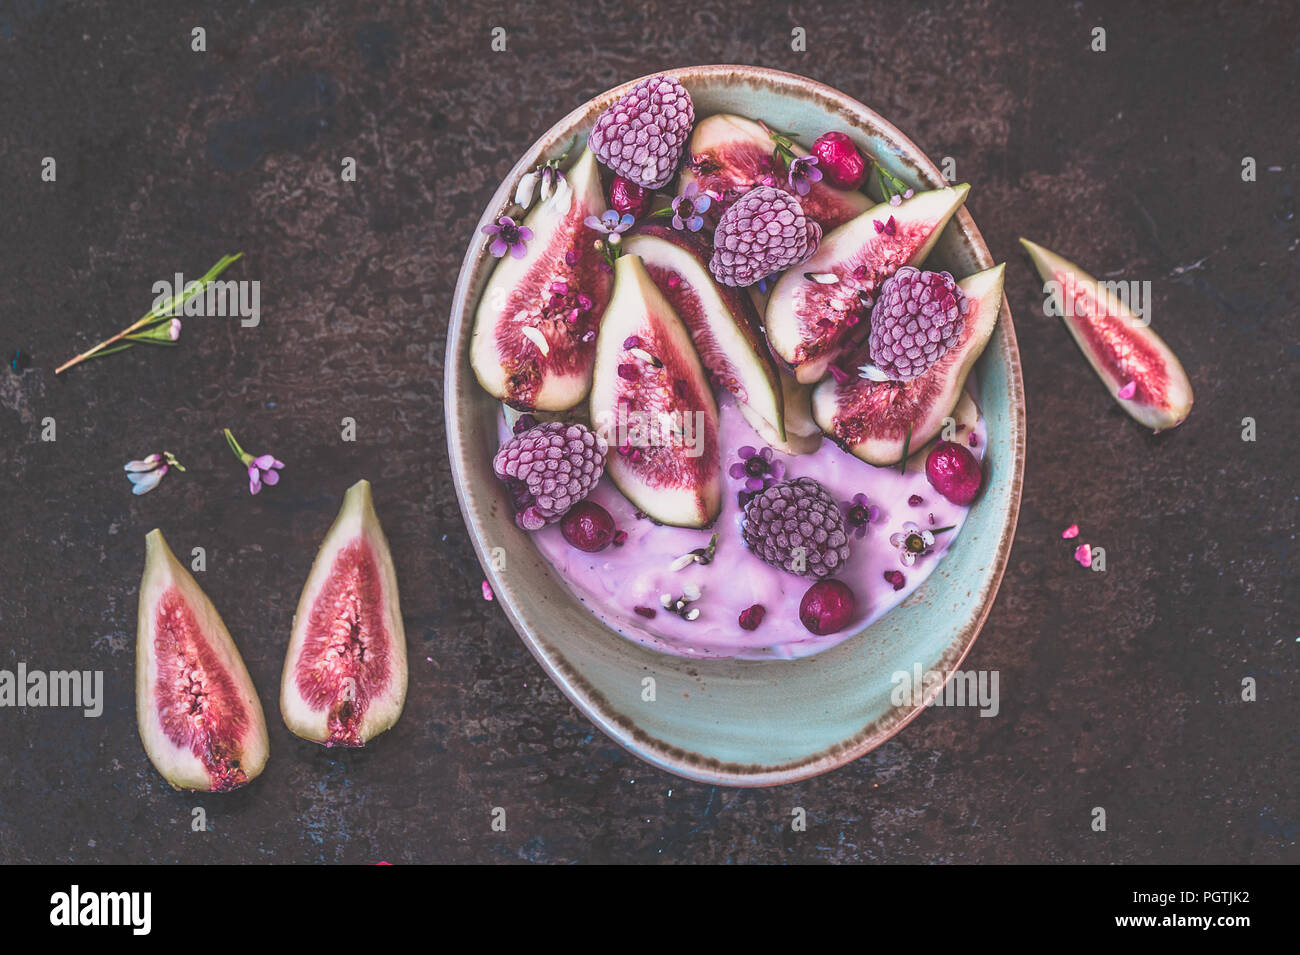 Healthy breakfast bowl with yogurt, fresh figs and frozen berries Stock Photo